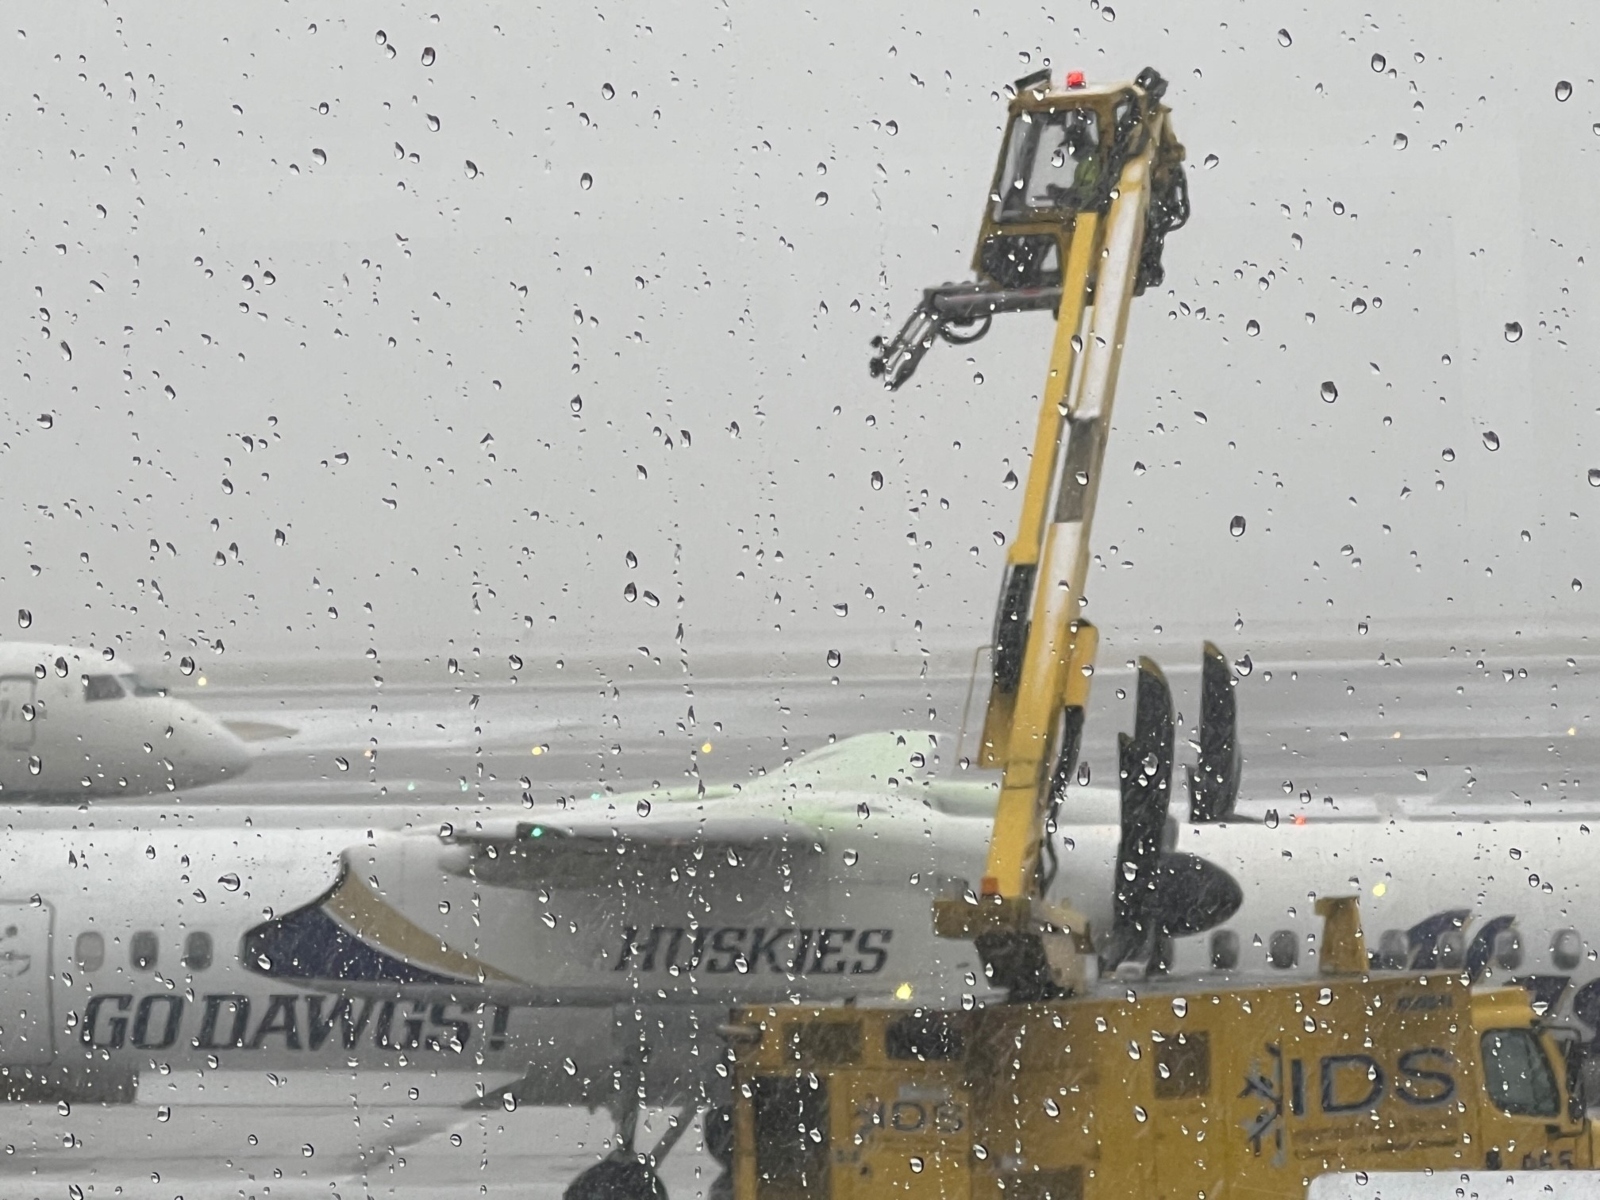 De-icing Airplanes During Winter 